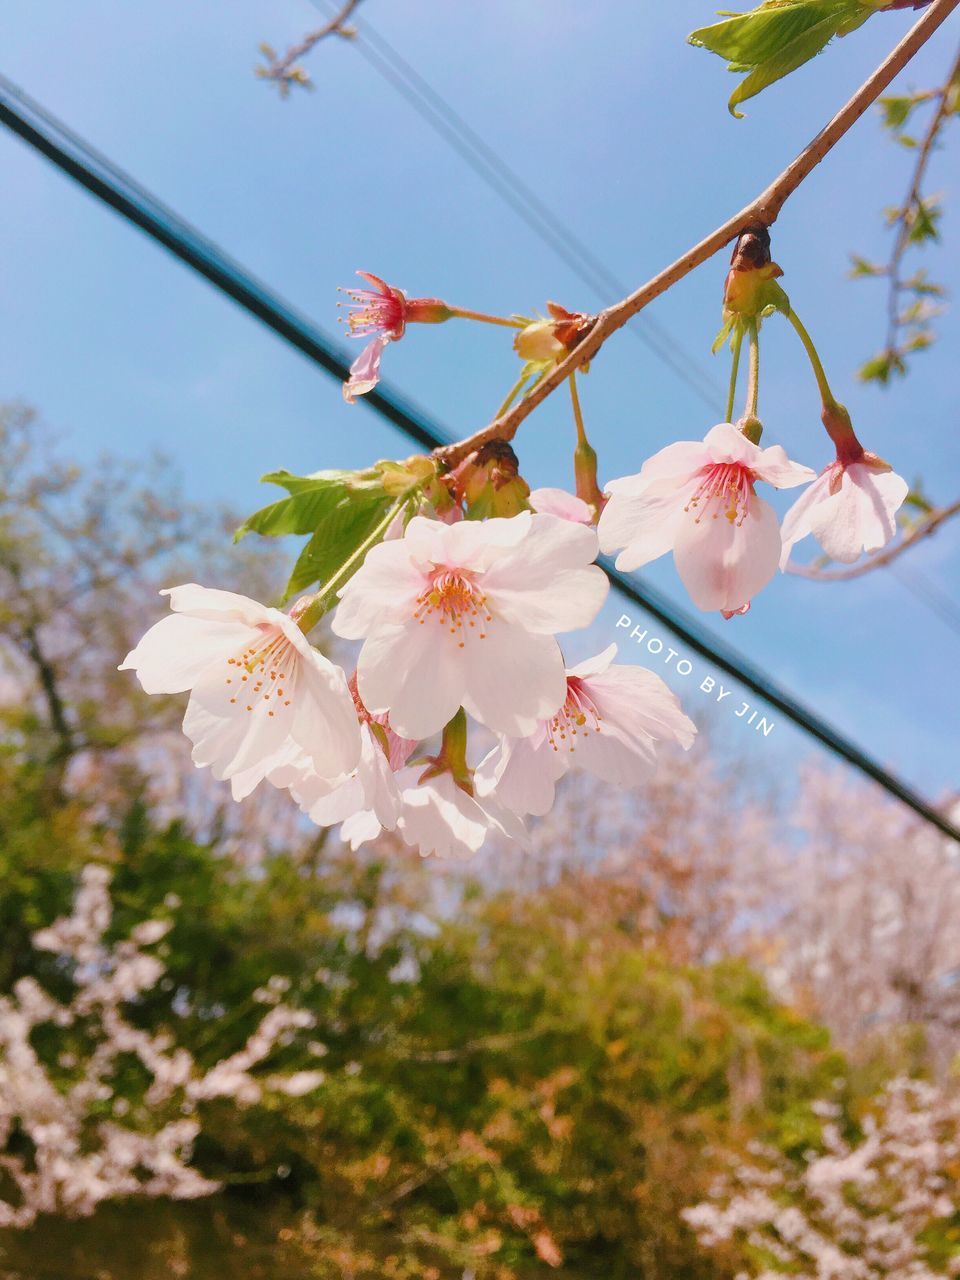 nature, growth, beauty in nature, springtime, tree, pink color, close-up, no people, flower, sunlight, freshness, outdoors, sky, day, fragility, blossom, low angle view, branch, flower head, plum blossom